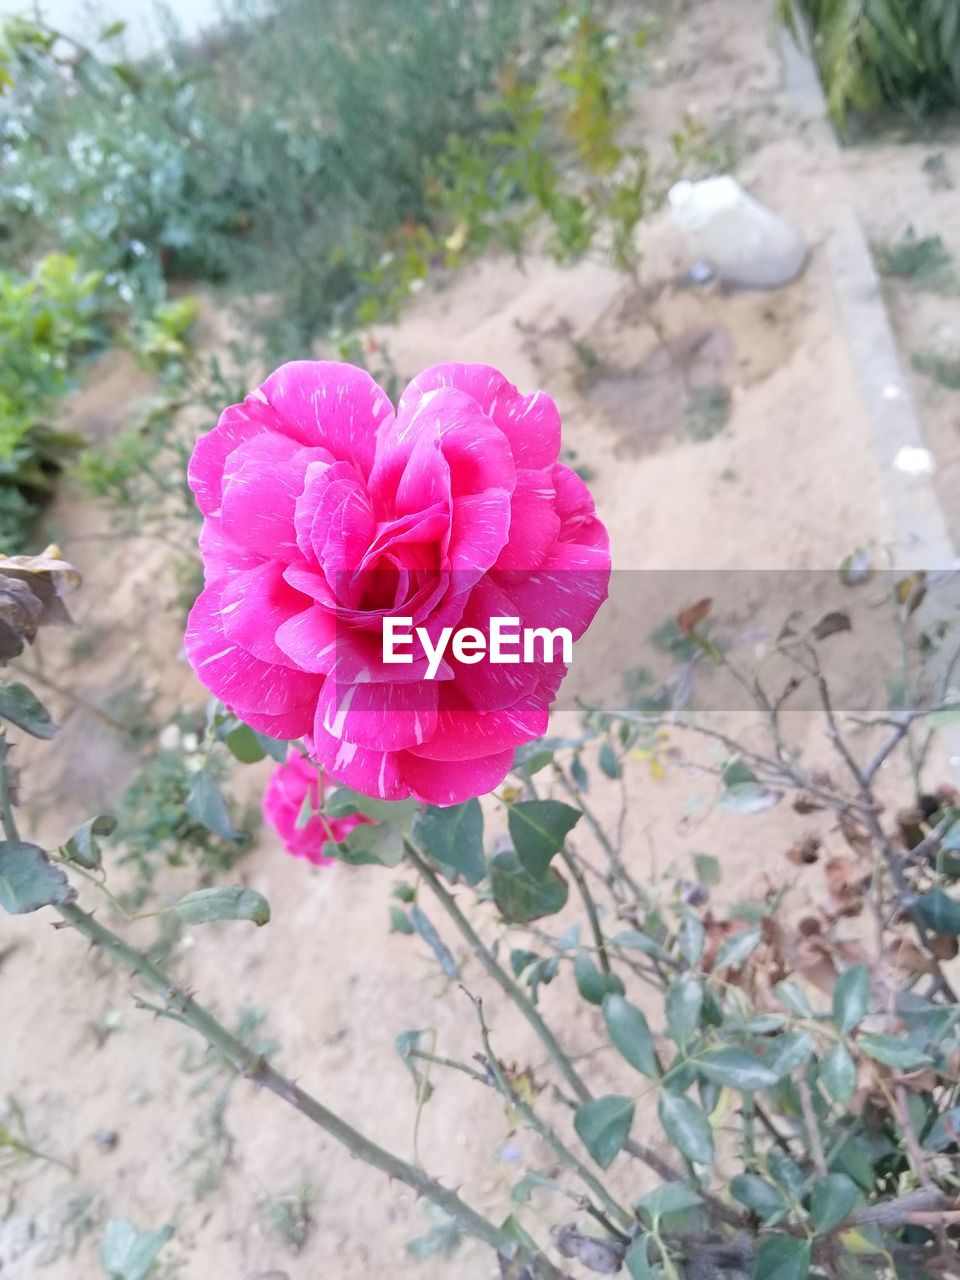 HIGH ANGLE VIEW OF PINK ROSE